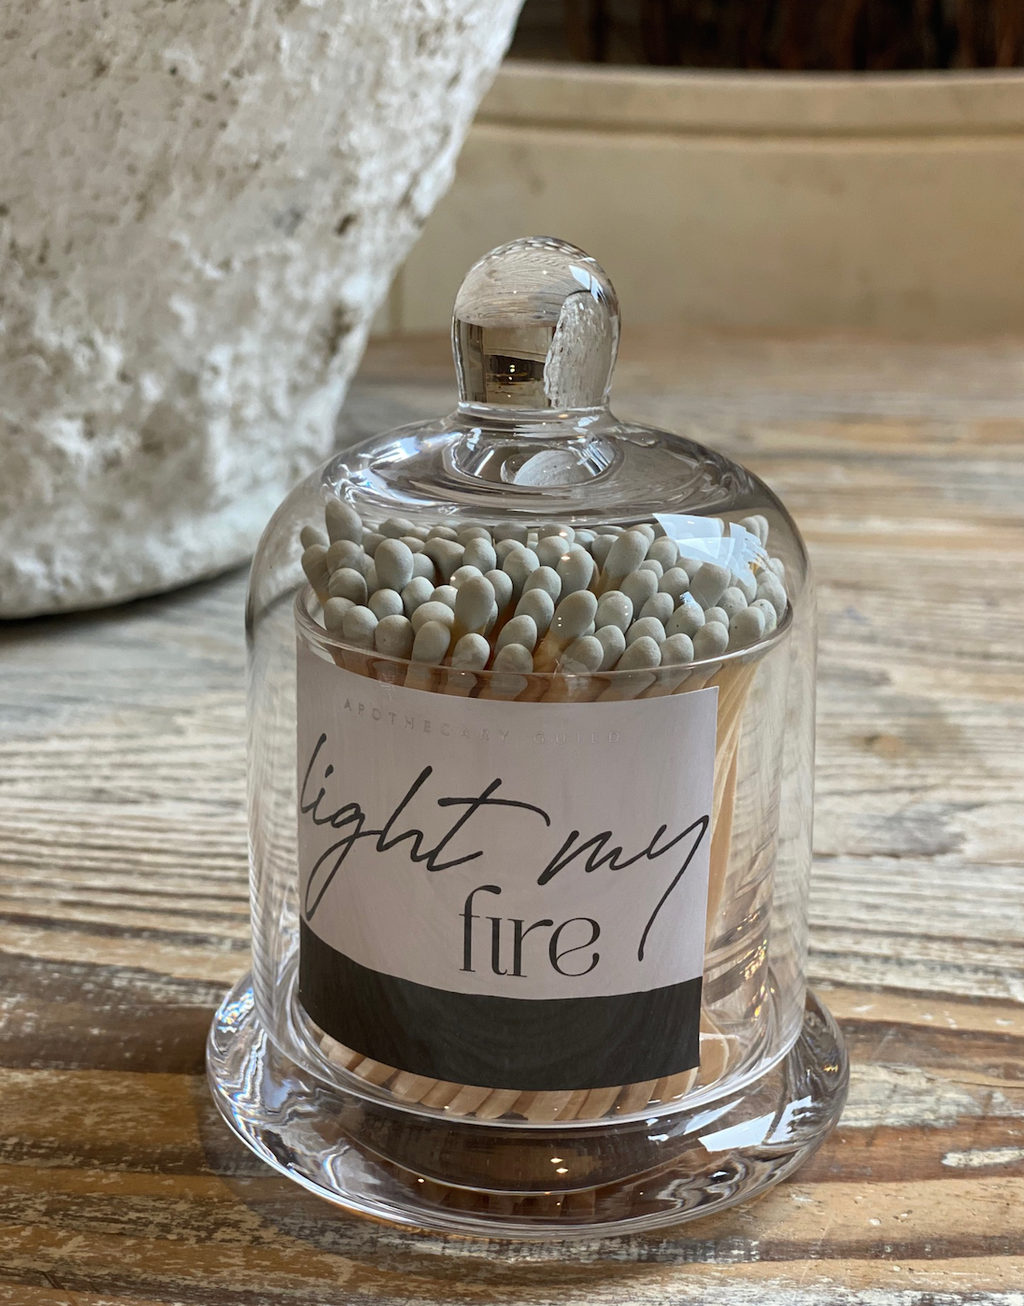 Light My Fire! White tipped matches in a beautiful apothecary jar!